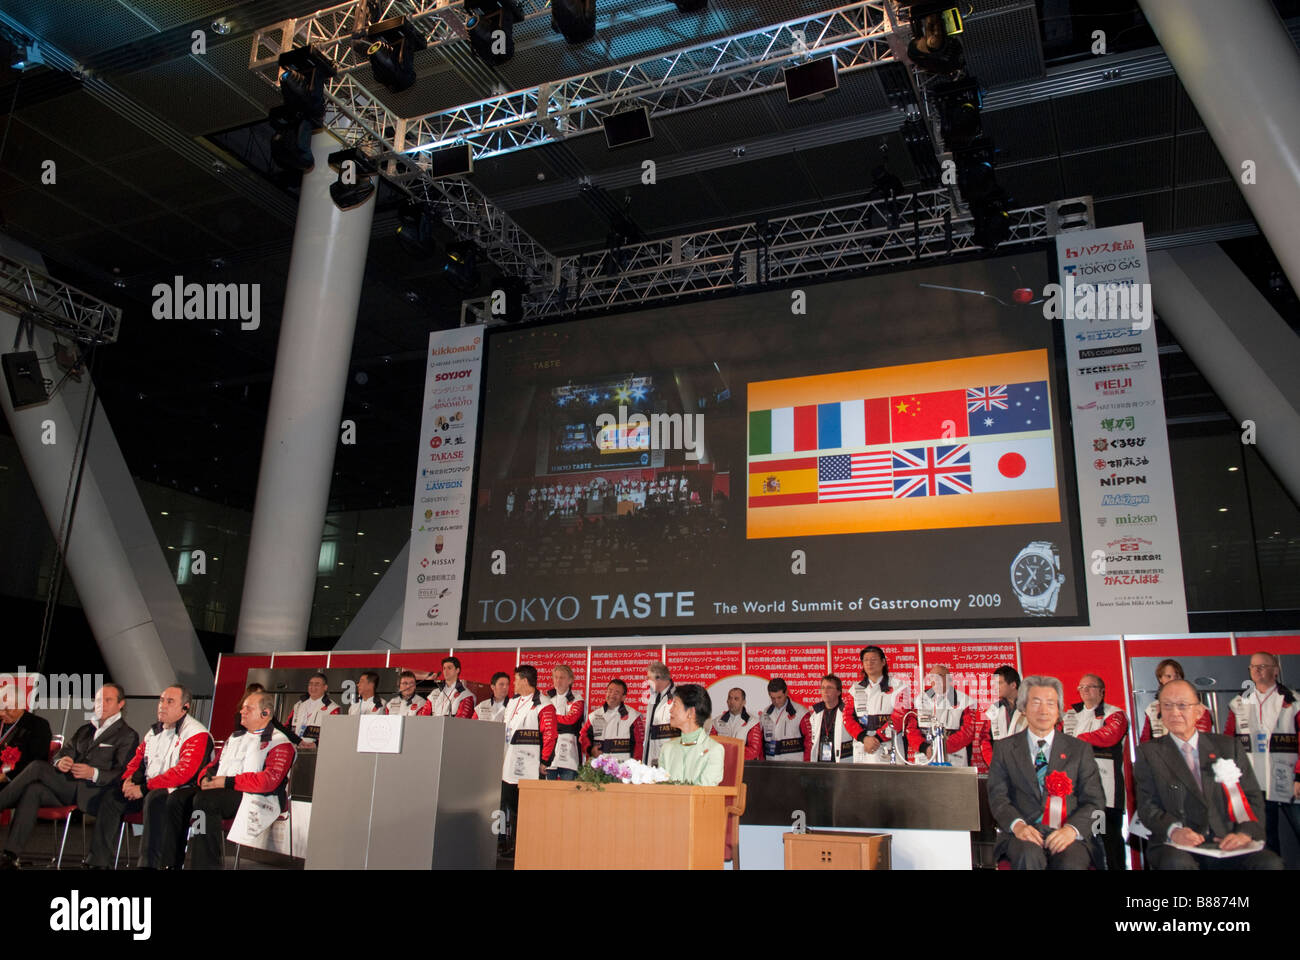 Many of the world s top chefs are assembled on stage for the opening ceremony of Tokyo Taste: The World Summit of Gastronomy. Stock Photo